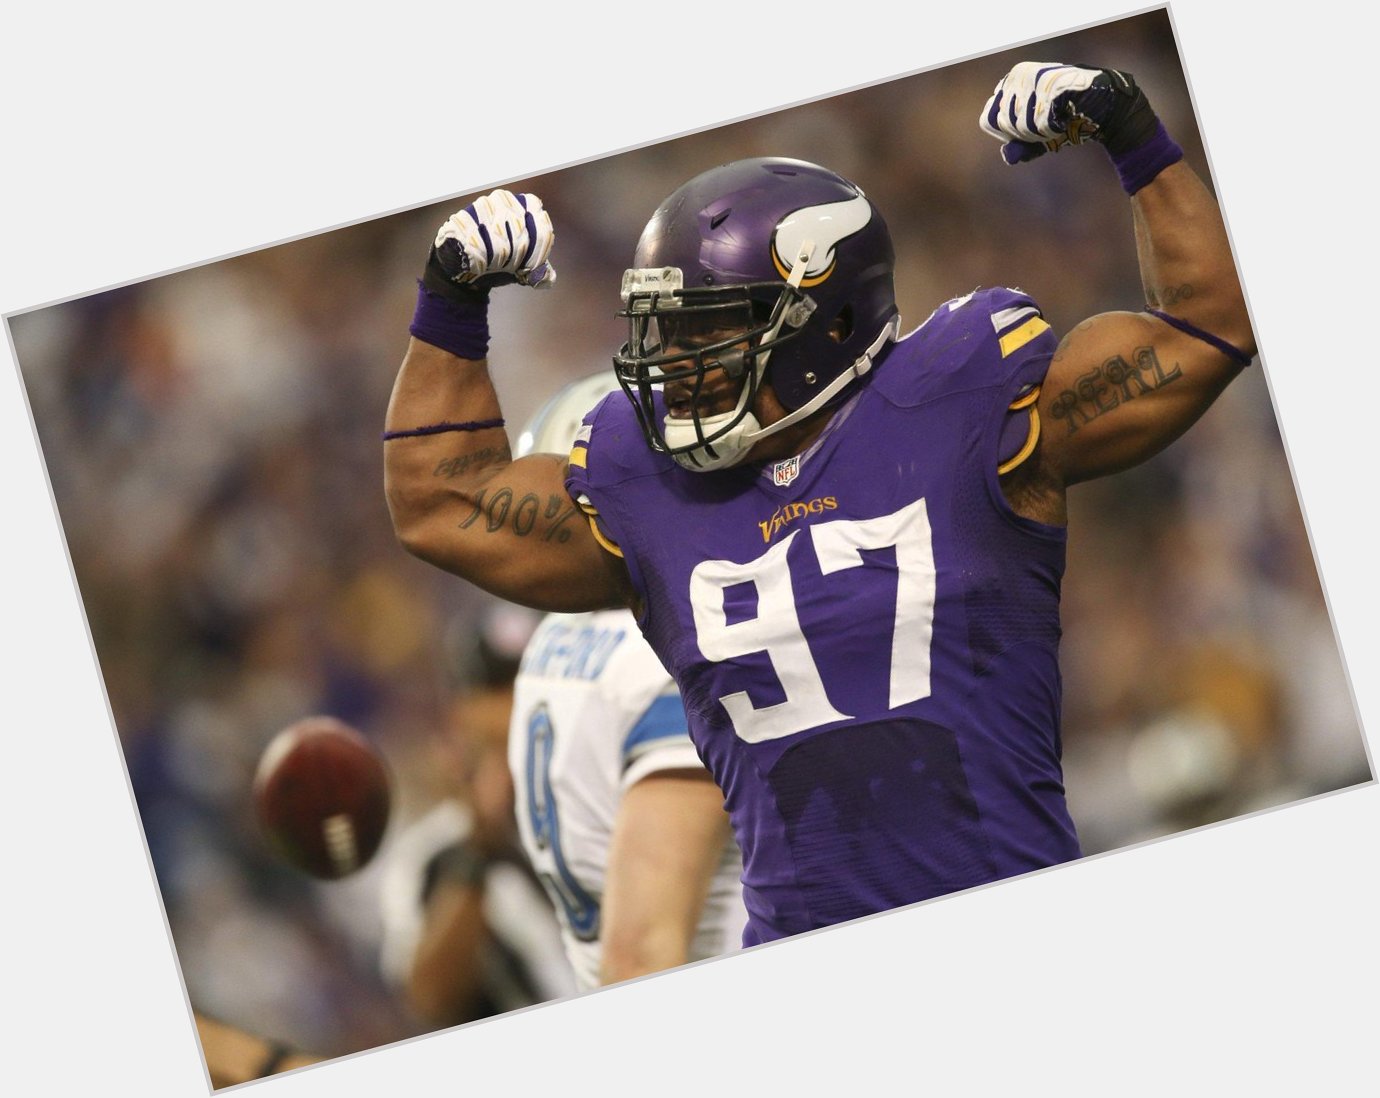 Happy 27th birthday to the one and only Everson Griffen! Congratulations 